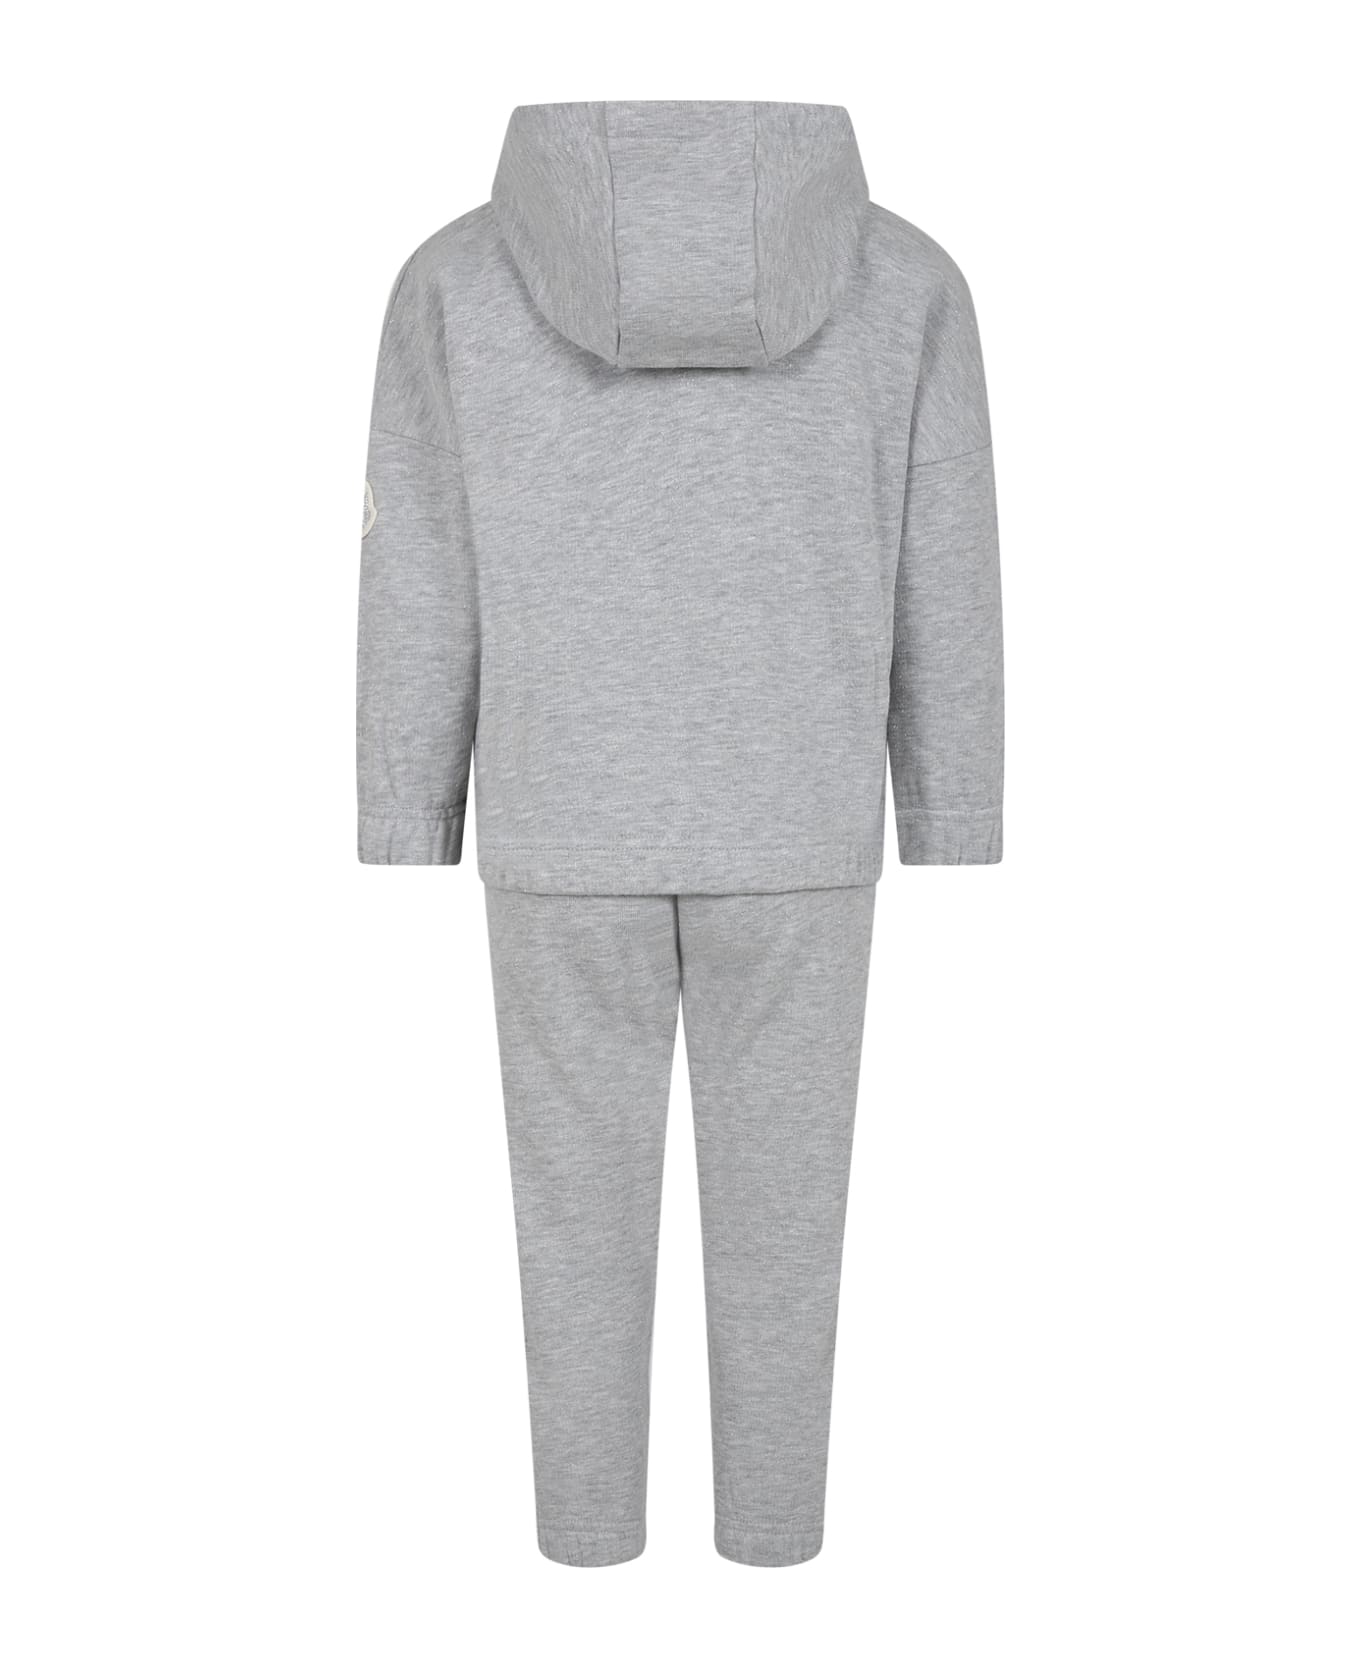 Moncler Grey Suit For Girl With Logo - Grey